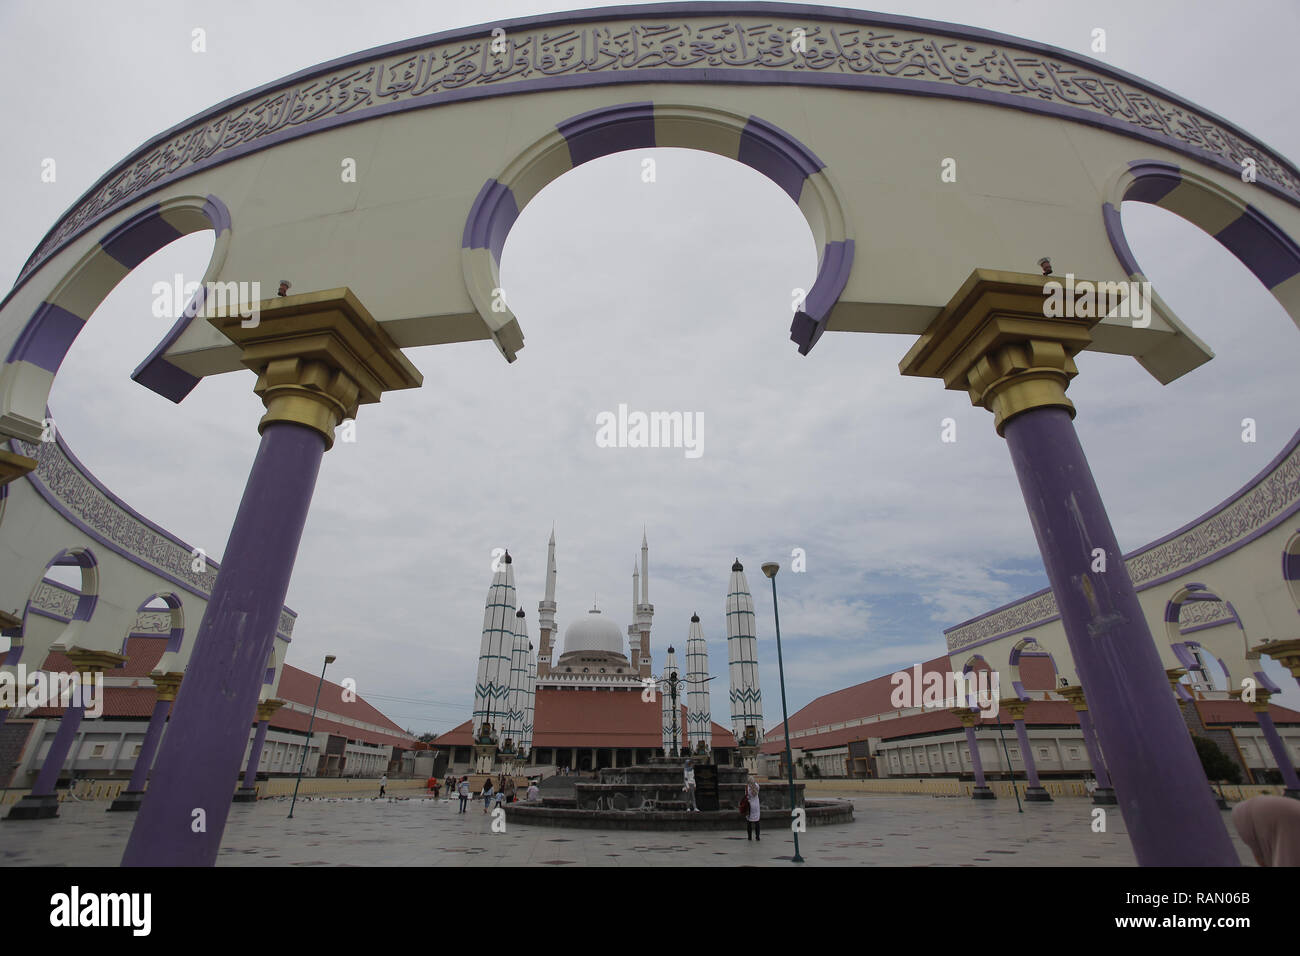 Semarang, Central Java, Indonesia. 2nd Jan, 2019. Residents are seen visiting the Central Java Grand Mosque (MAJT) complex in Semarang, Central Java.The mosque with a capacity of 15,000 worshipers is not only a center of worship and Islamic da'wah, it is also a favourite tourist destination in Semarang because it has a unique architecture with a blend of Javanese, Arabic and Roman styles. Credit: Adriana Adinandra/SOPA Images/ZUMA Wire/Alamy Live News Stock Photo